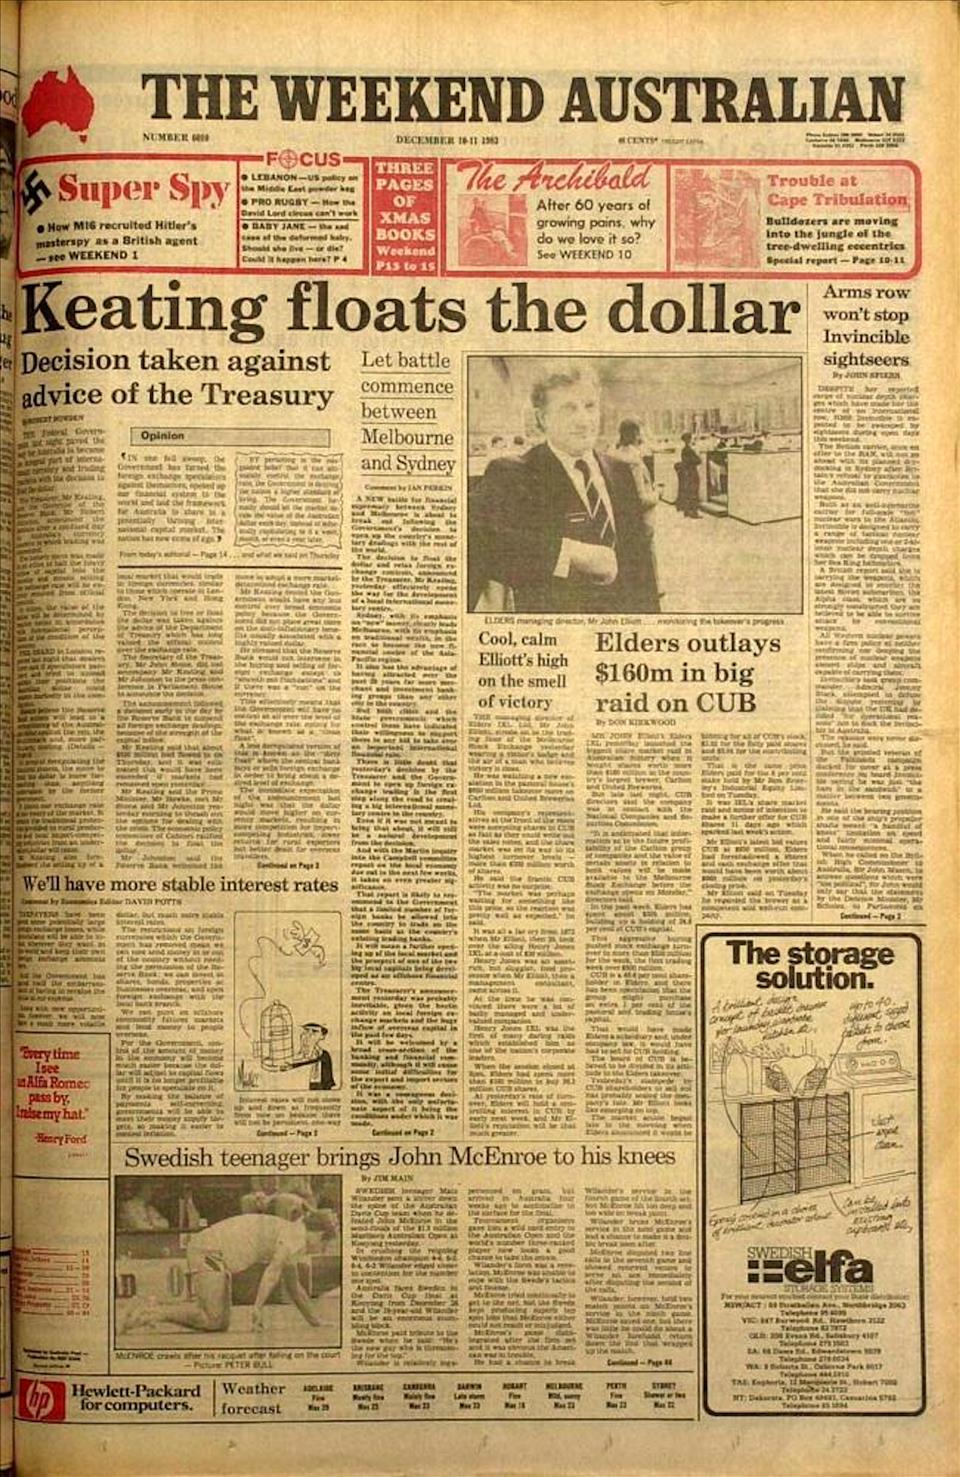 Happy Birthday AUD: How Our Australian Dollar Was Floated, 40 Years Ago This Week